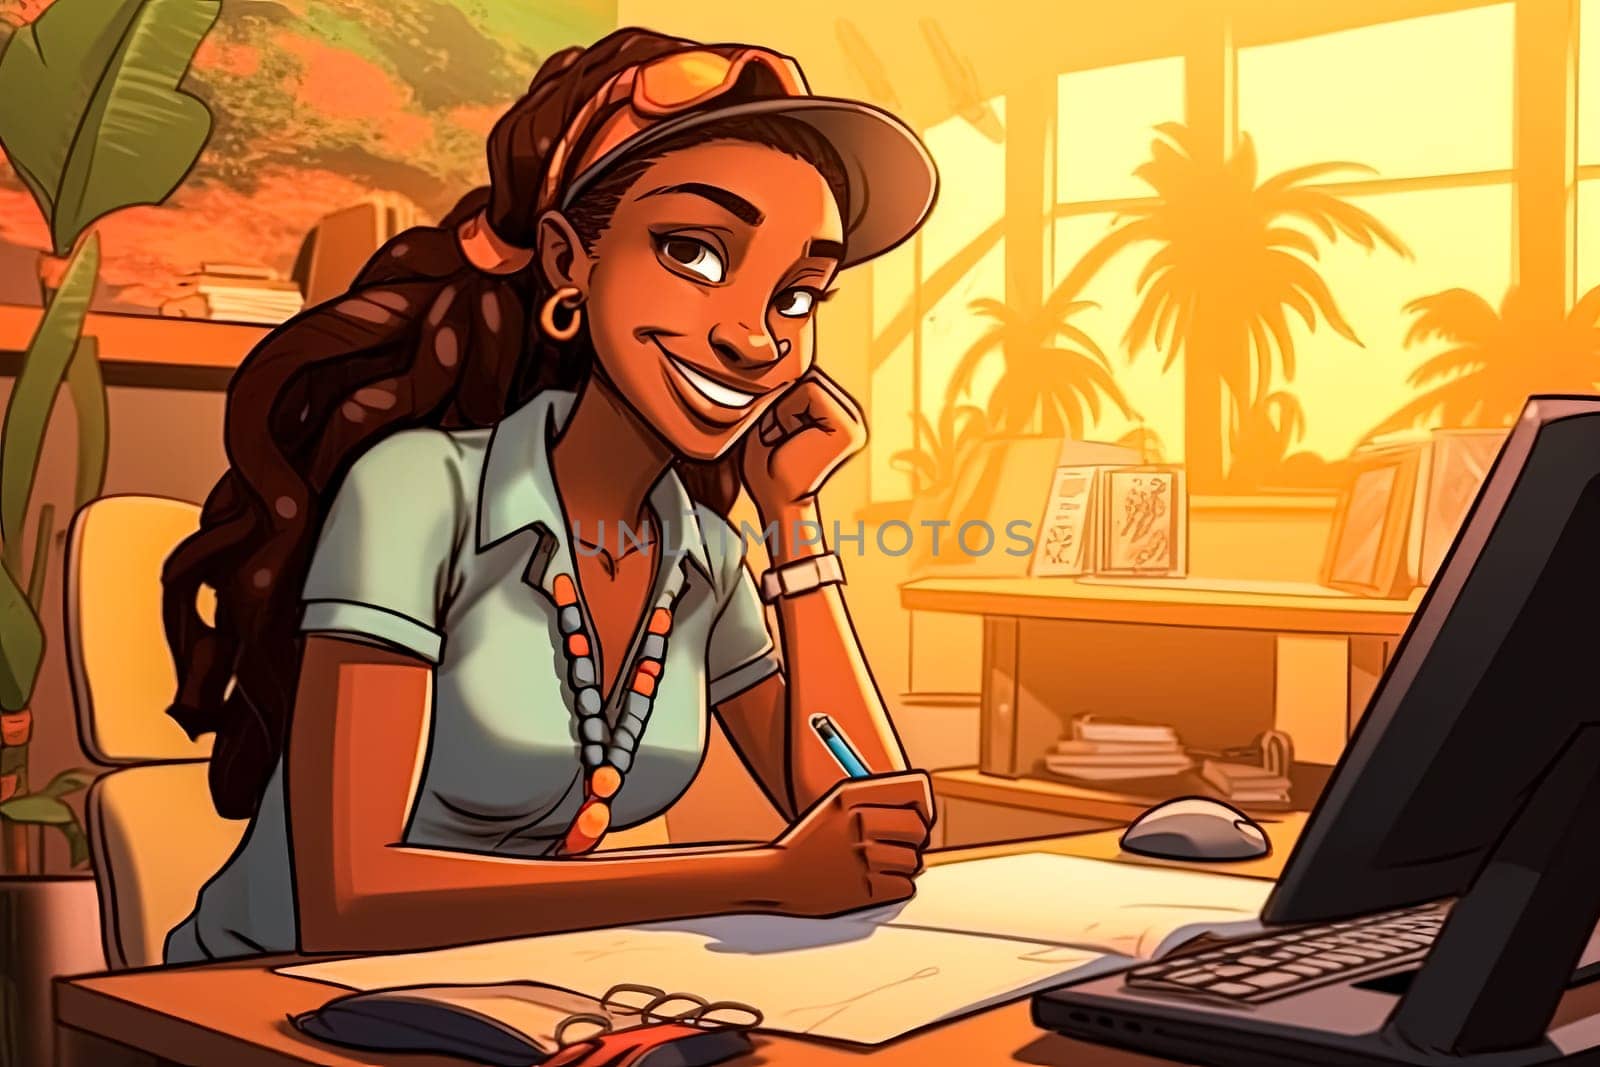 A woman with curly hair is sitting at a desk with a stack of papers in front of her. She is smiling and she is enjoying her work